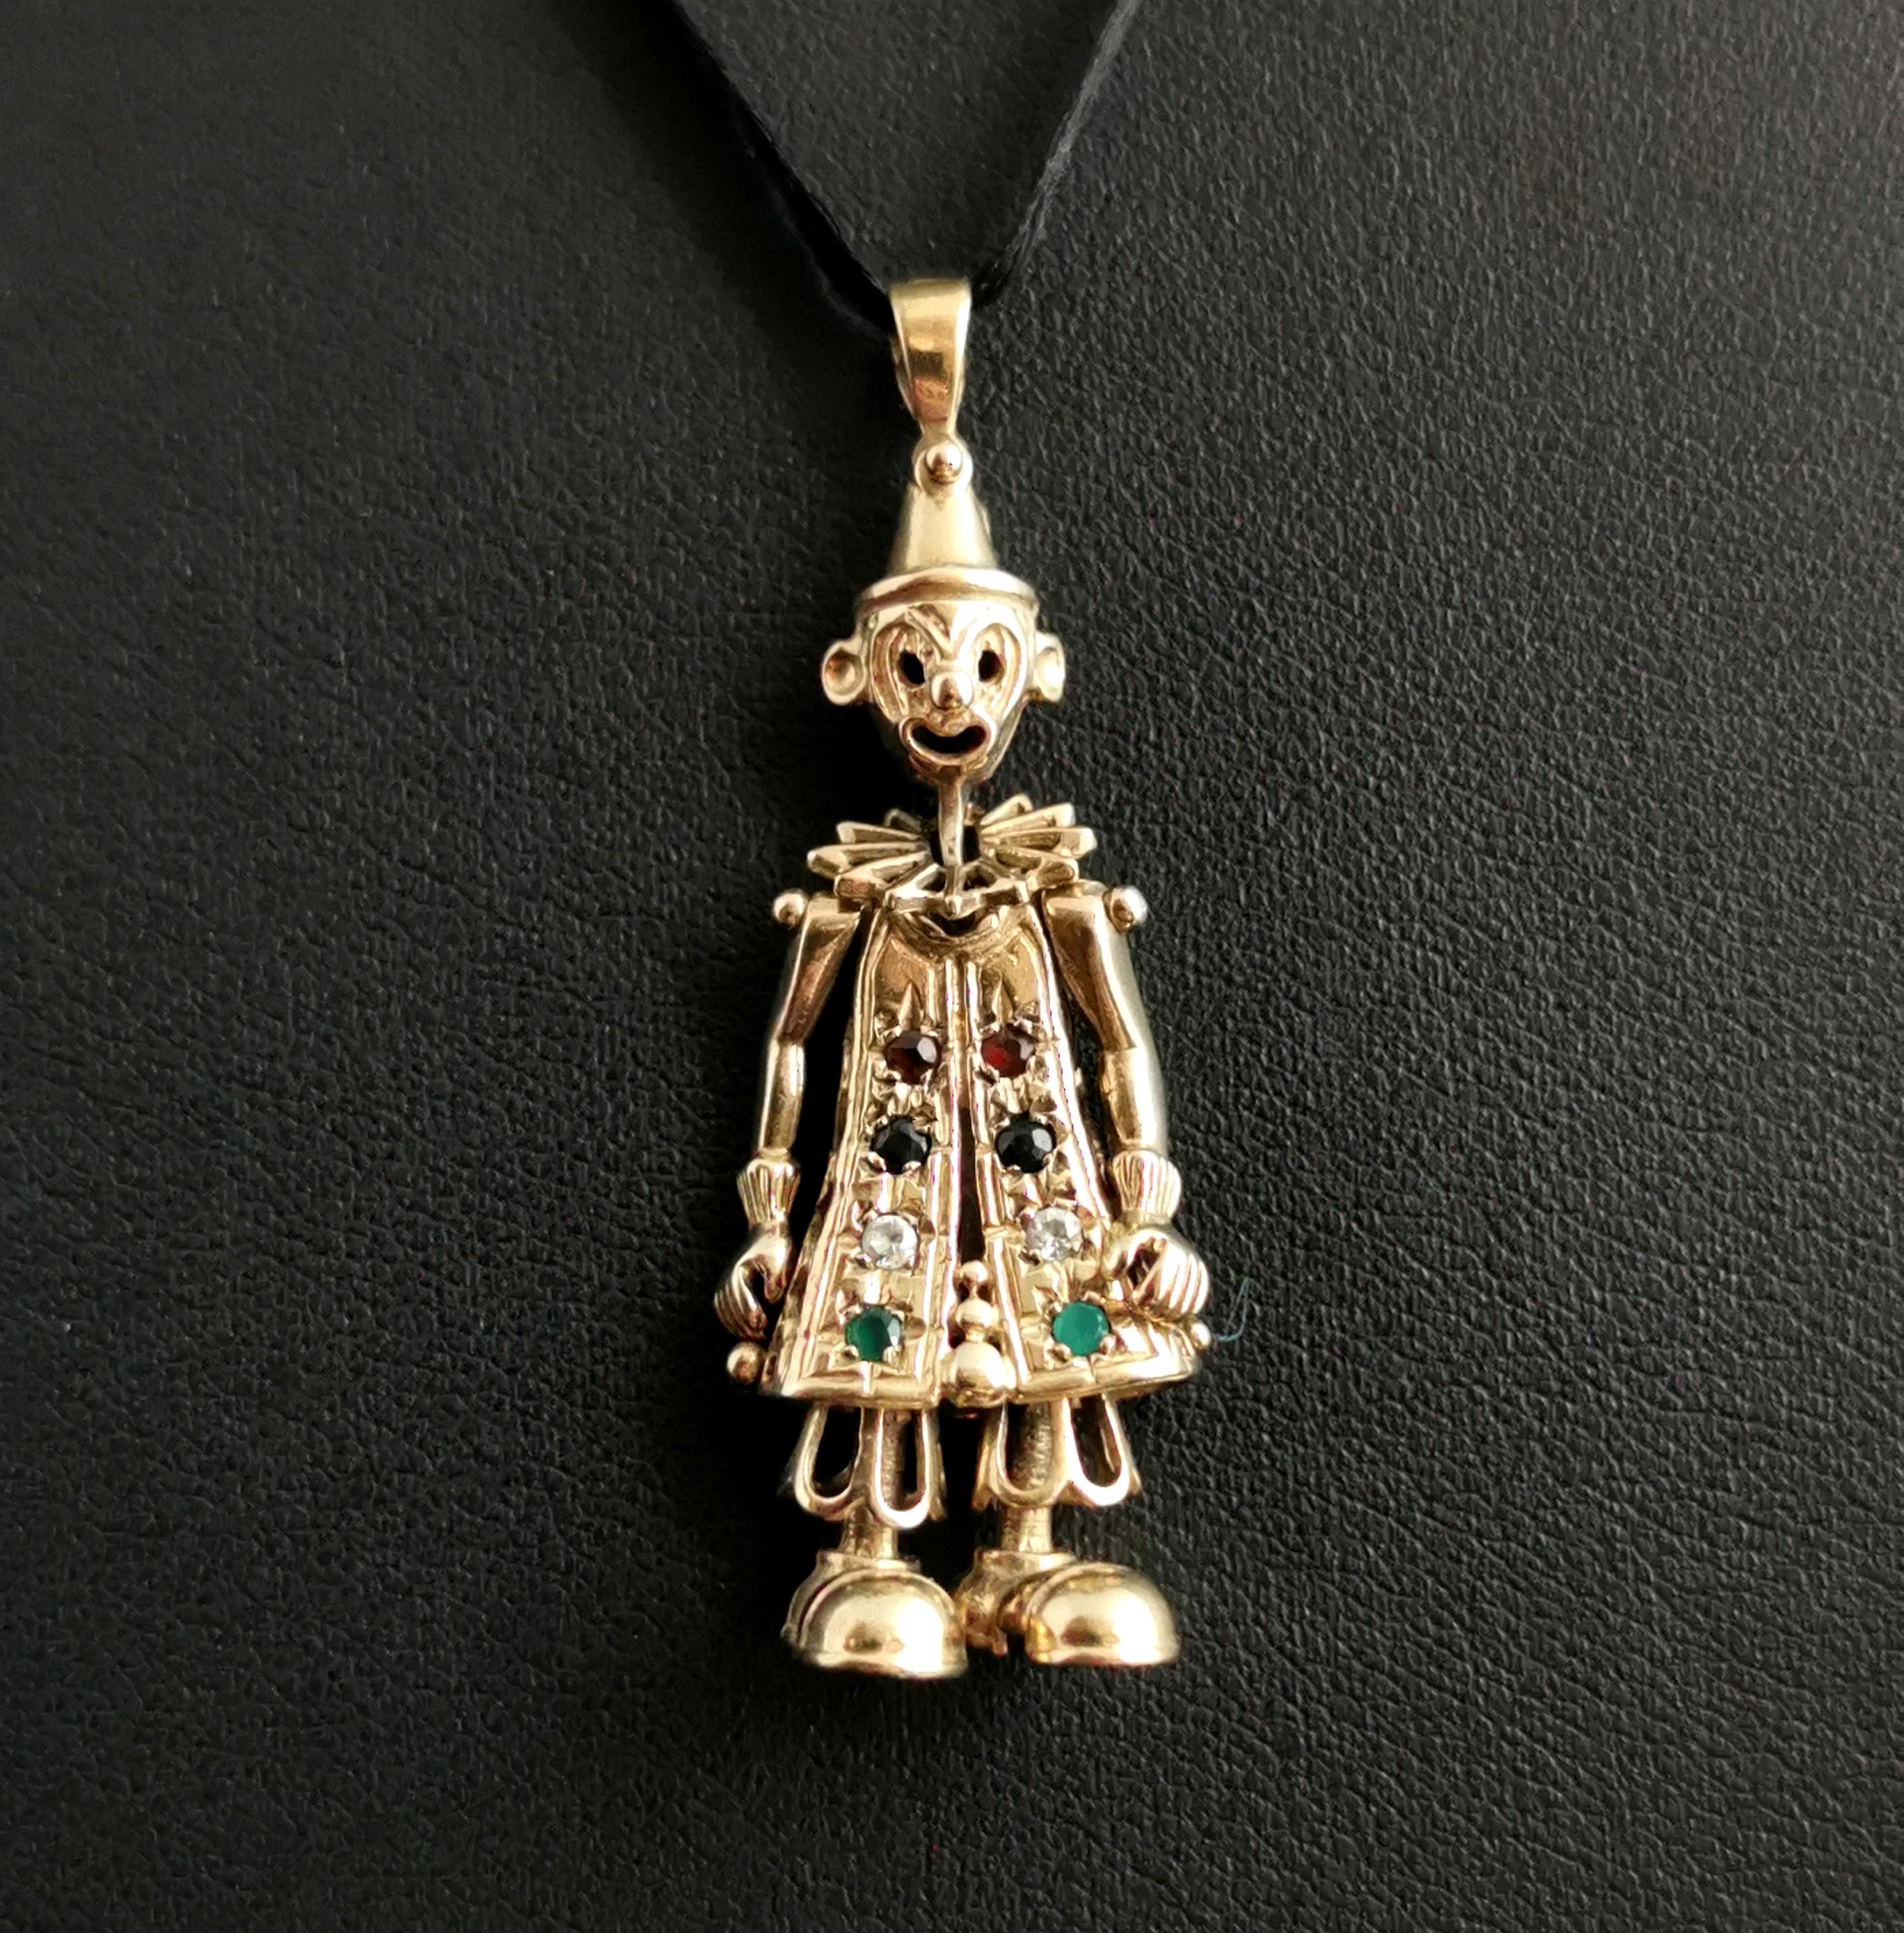 A fantastic vintage 9kt yellow gold articulated clown pendant.

A classic favourite from the 90s this clown pendant has movable limbs and is set with paste, Sapphire, Garnet and cubic zirconia stones to the front.

A great novelty piece, a good